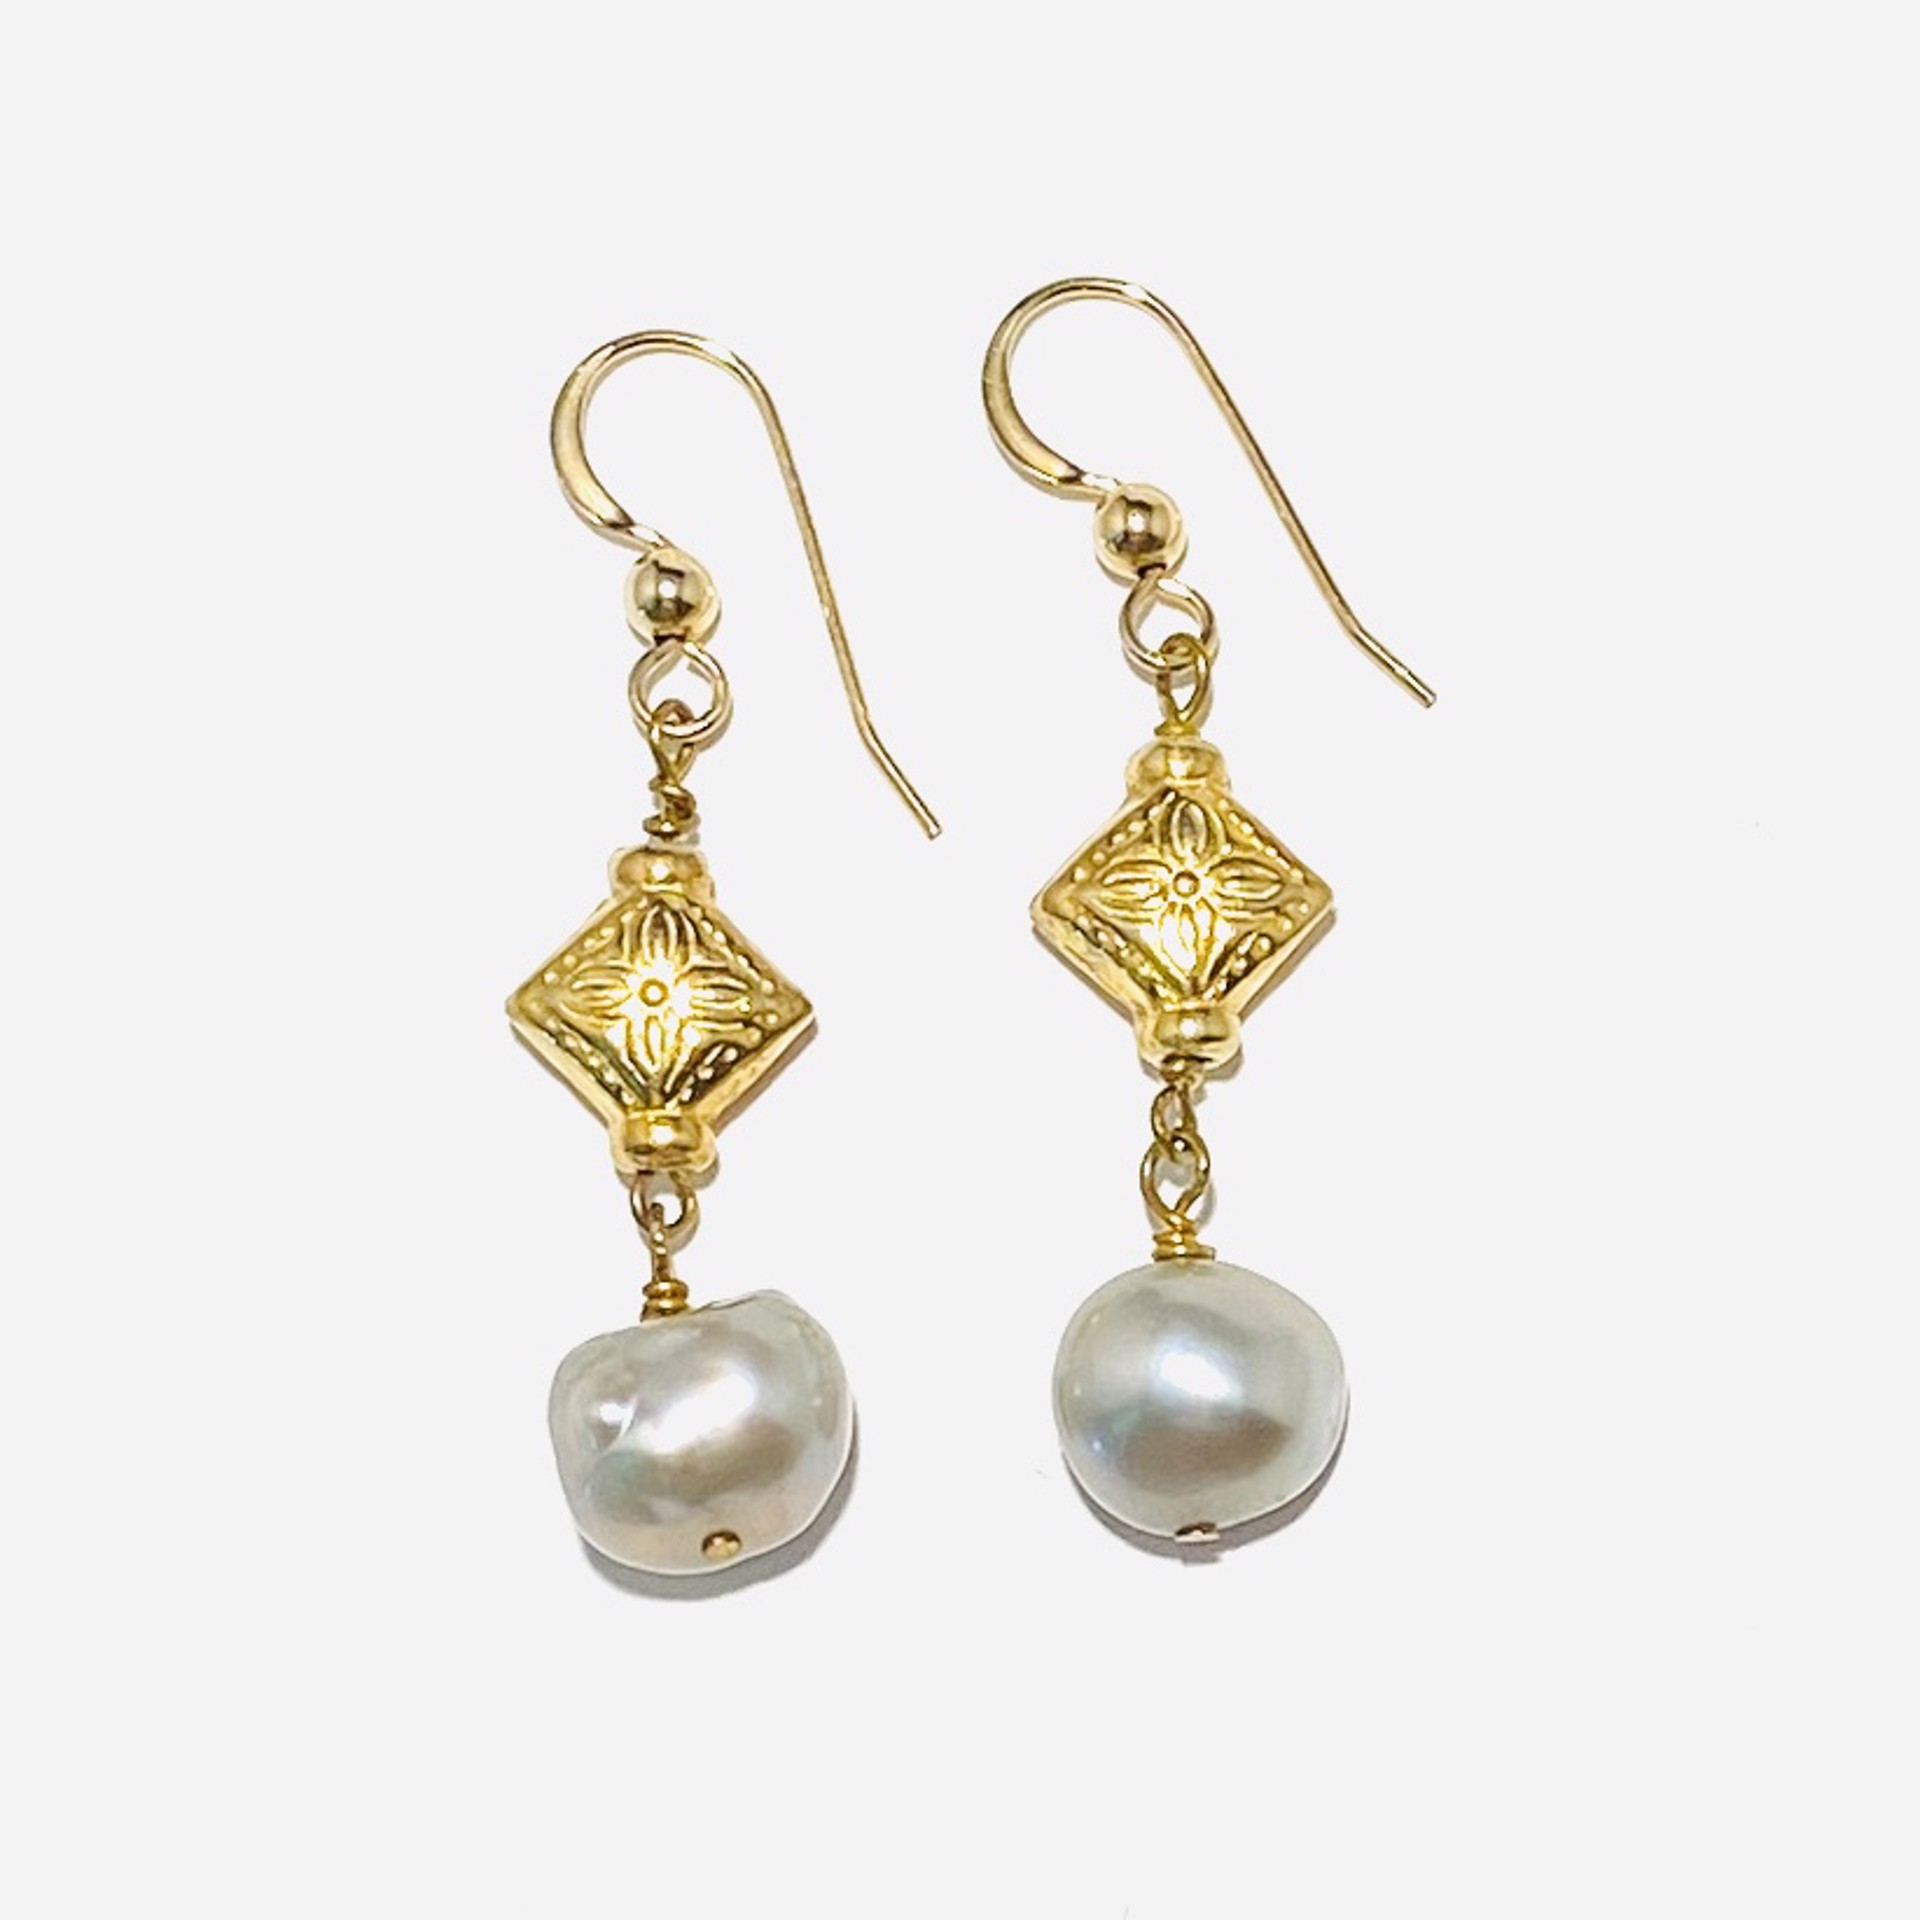 Round Grey Pearl, GF Bead Earrings LR23-26 by Legare Riano